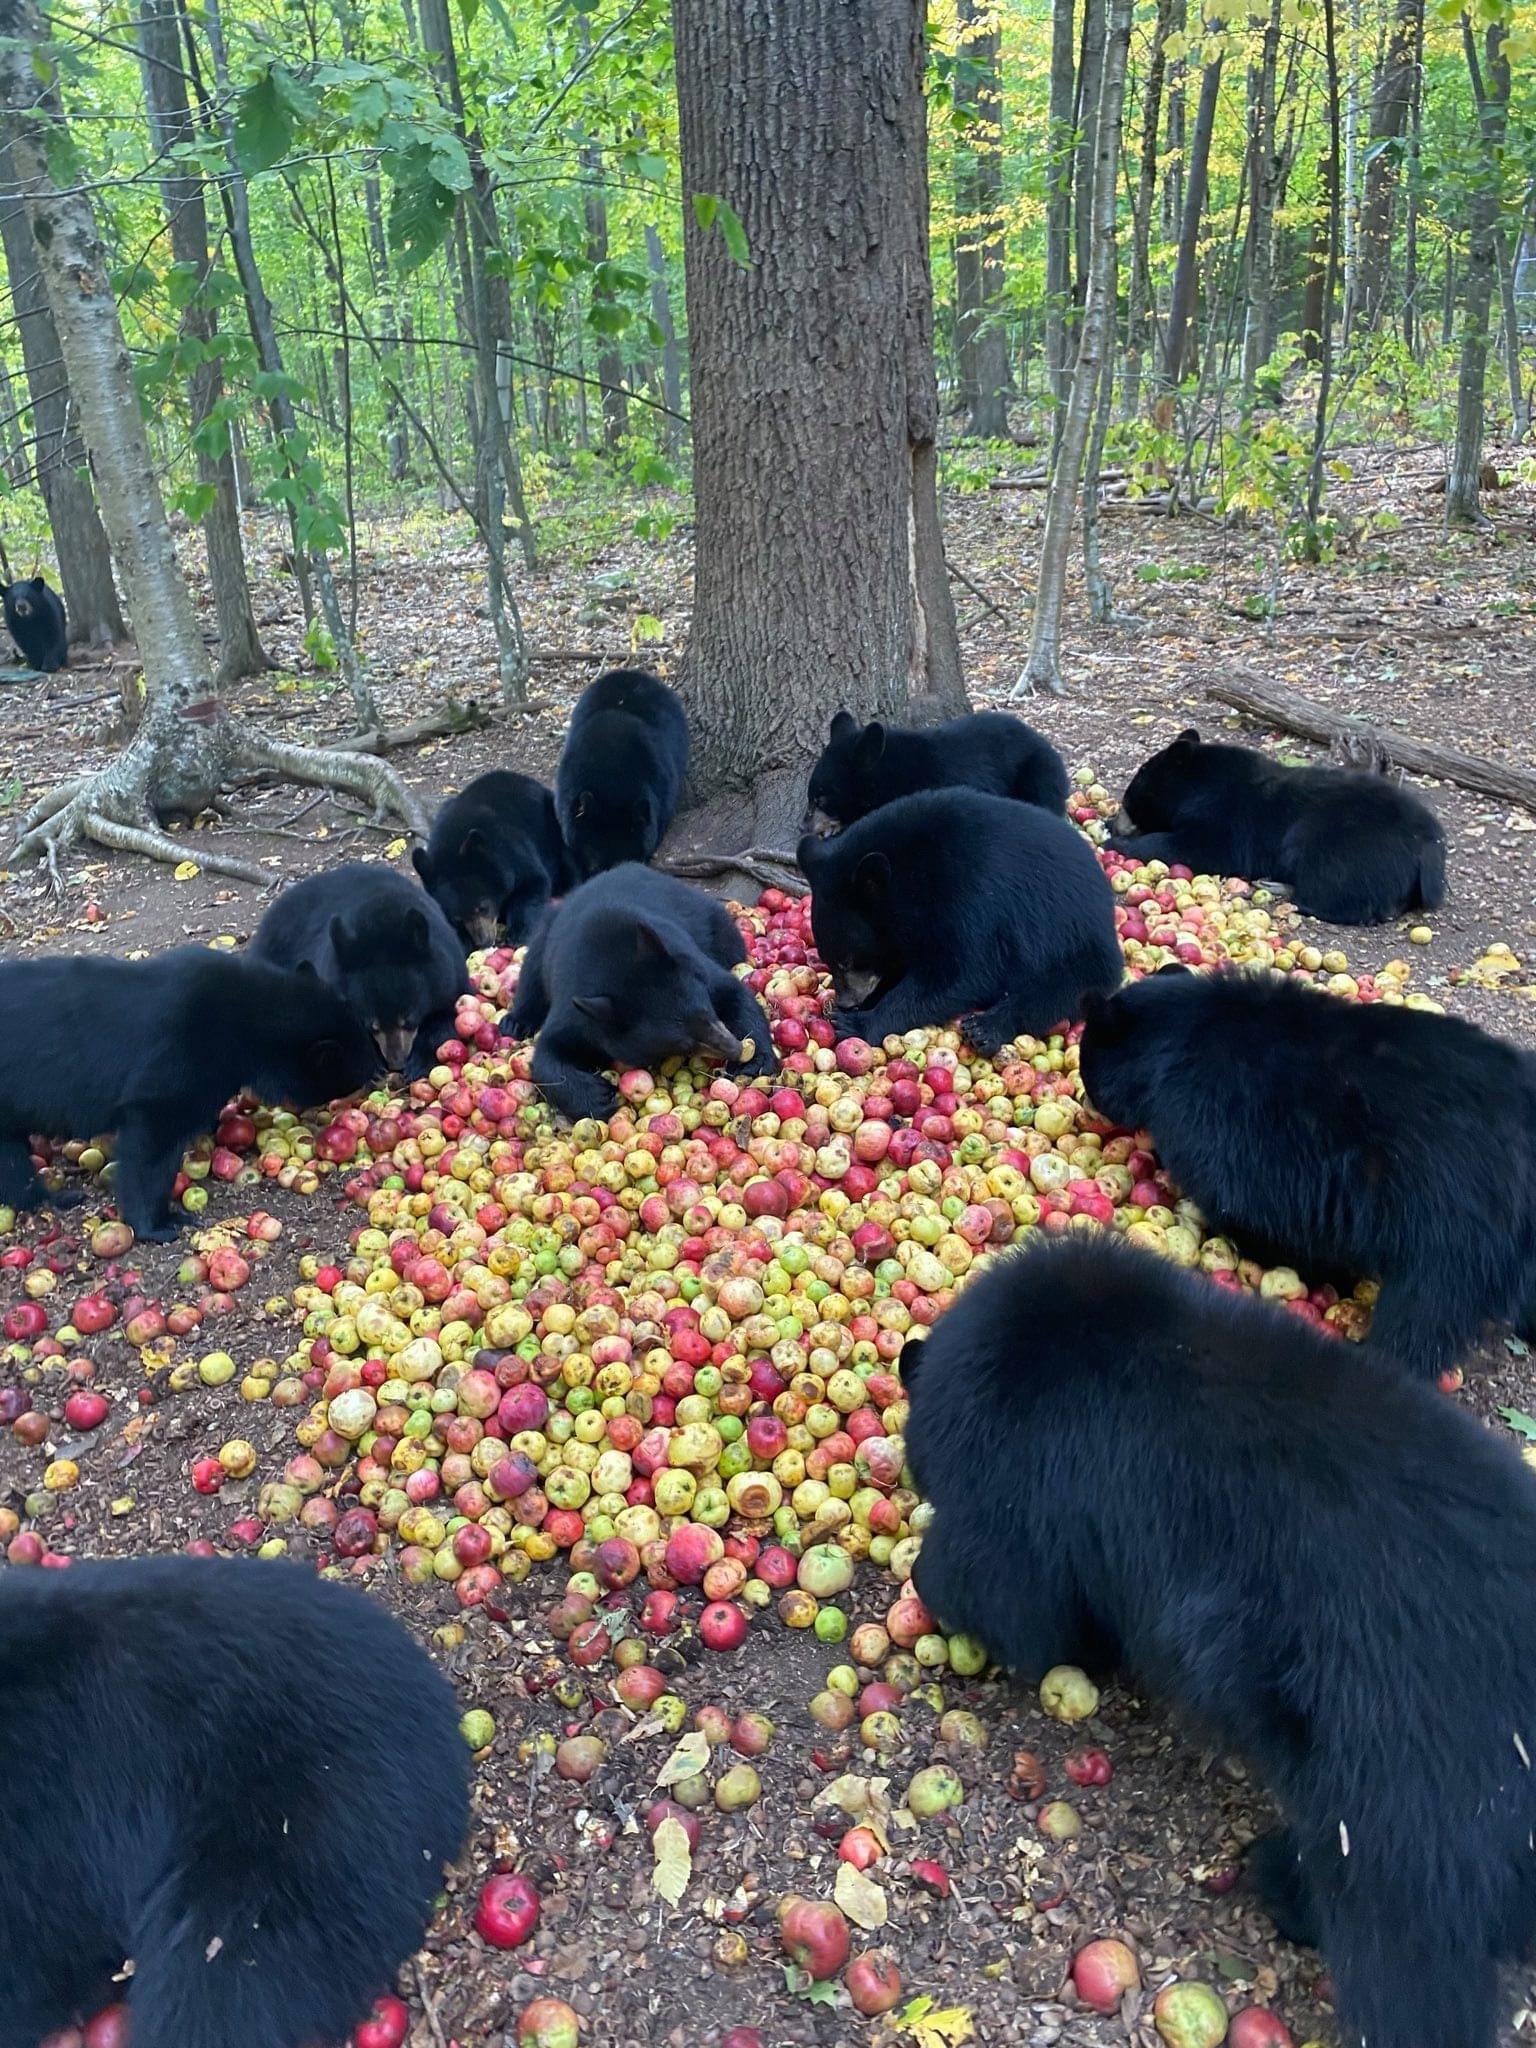 pics and memes daily dose - bears eating fermented apples